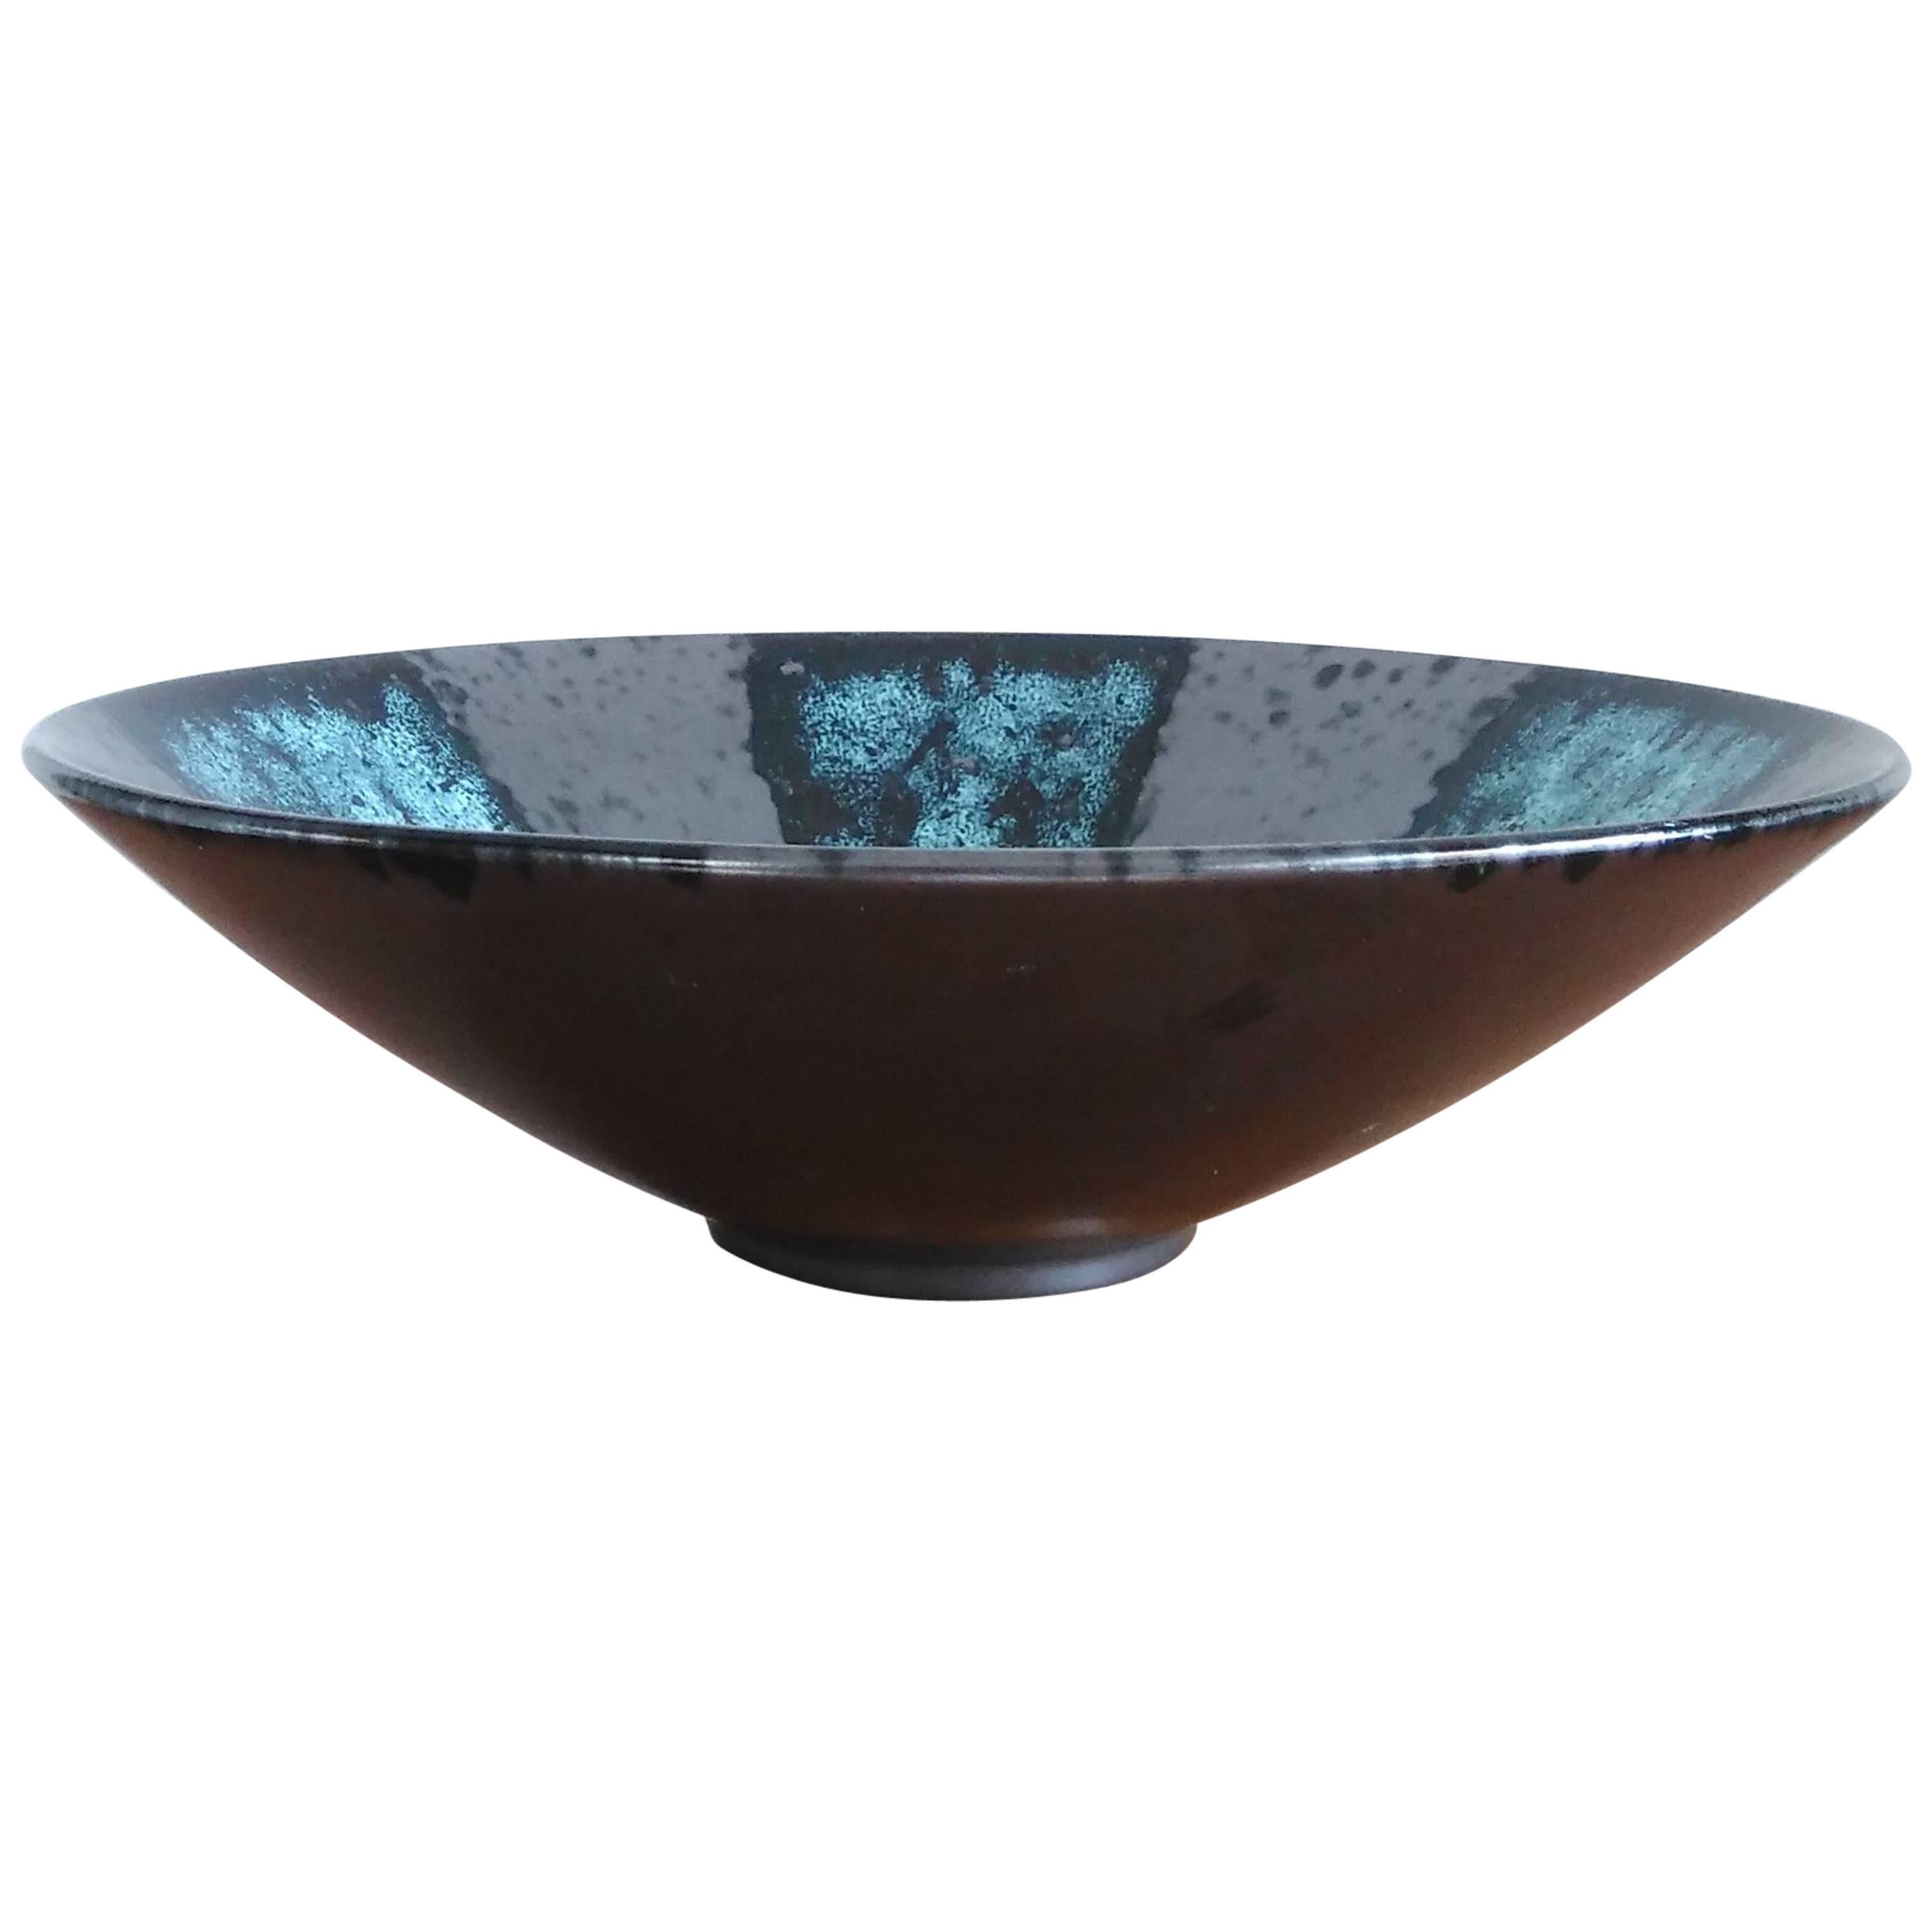 Rare Blue and Flat Black Ceramic Dish by Elchinger, France, 1960s